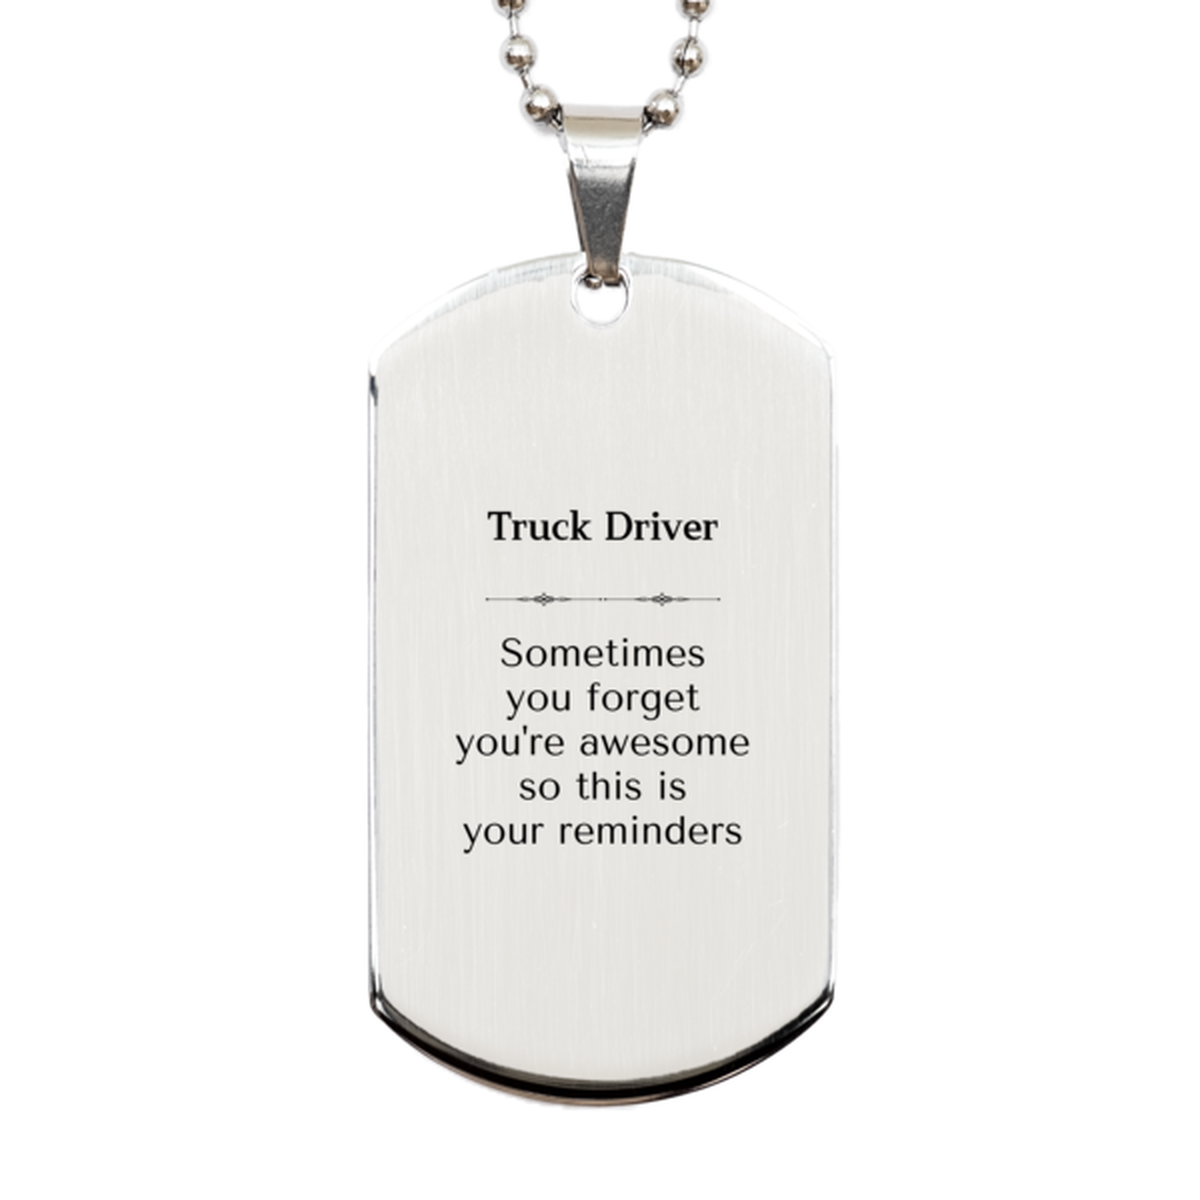 Sentimental Truck Driver Silver Dog Tag, Truck Driver Sometimes you forget you're awesome so this is your reminders, Graduation Christmas Birthday Gifts for Truck Driver, Men, Women, Coworkers